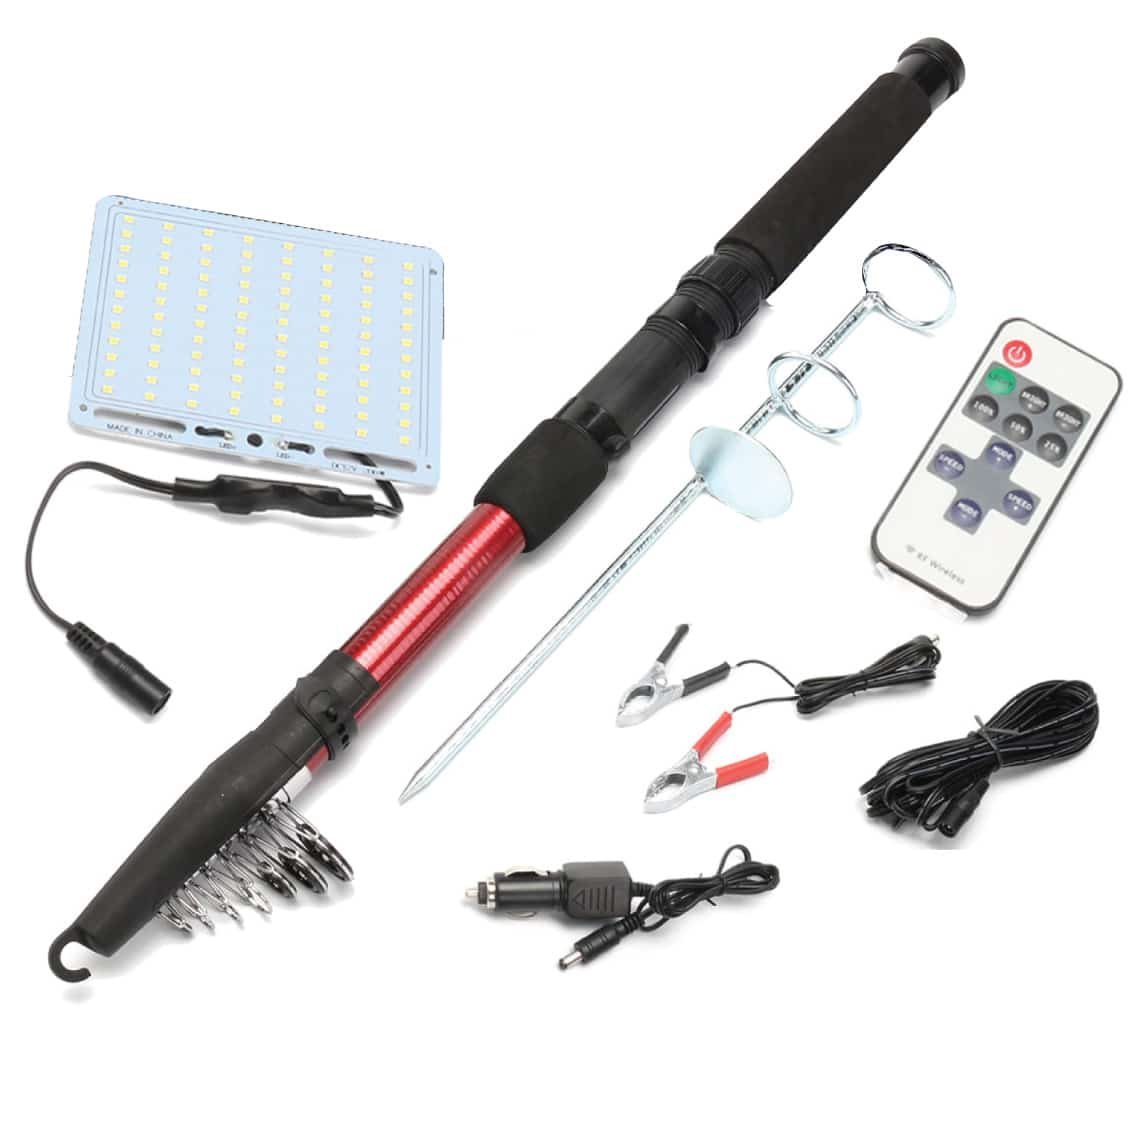 Telescopic Light with Remote Control (Perfect for Camping and Braai Areas)  - My Kleine Winkel